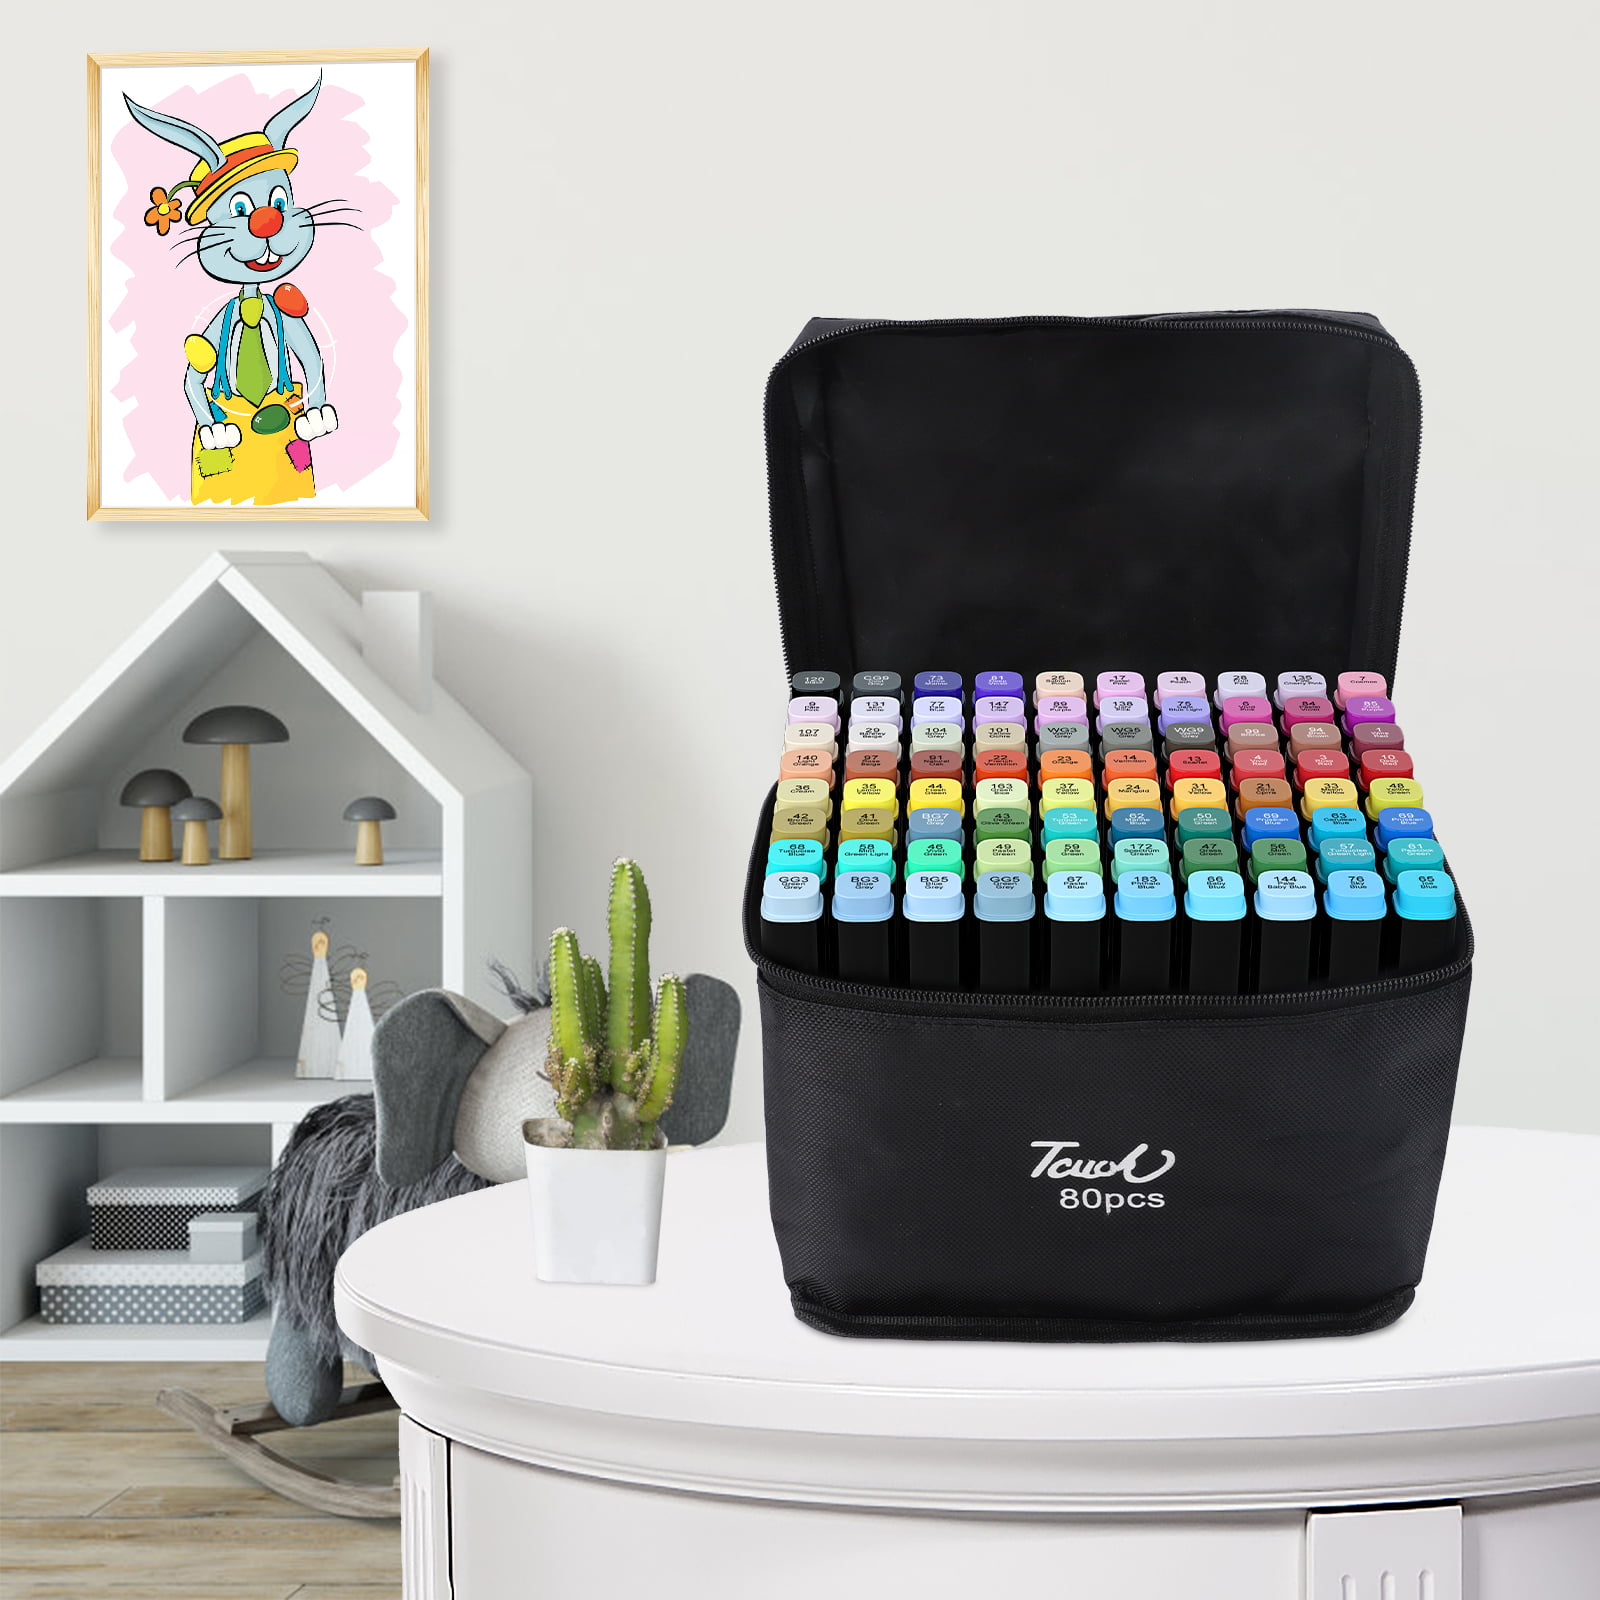 chfine Art Marker Set - 80 Colors Dual Tip Permanent Sketch Markers - Ideal  for Artists Adults Kids Drawing Coloring Crafts Gifts with Carry Case for